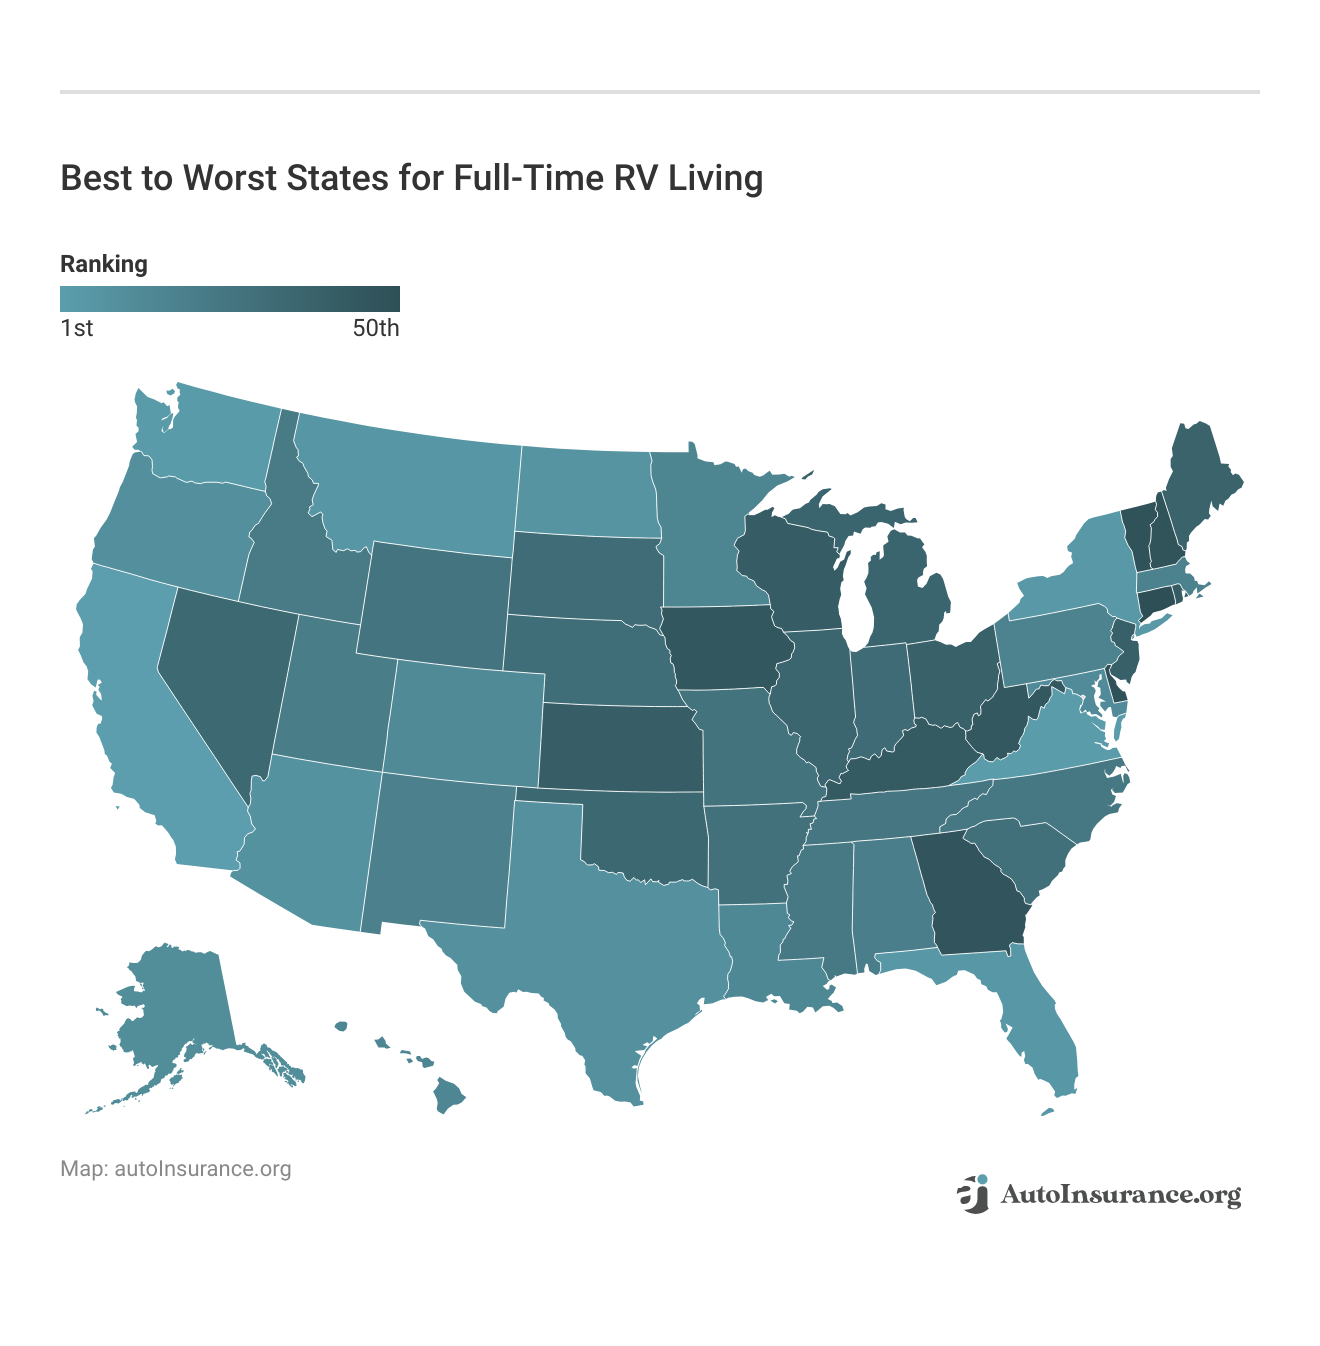 <h3>Best to Worst States for Full-Time RV Living</h3>